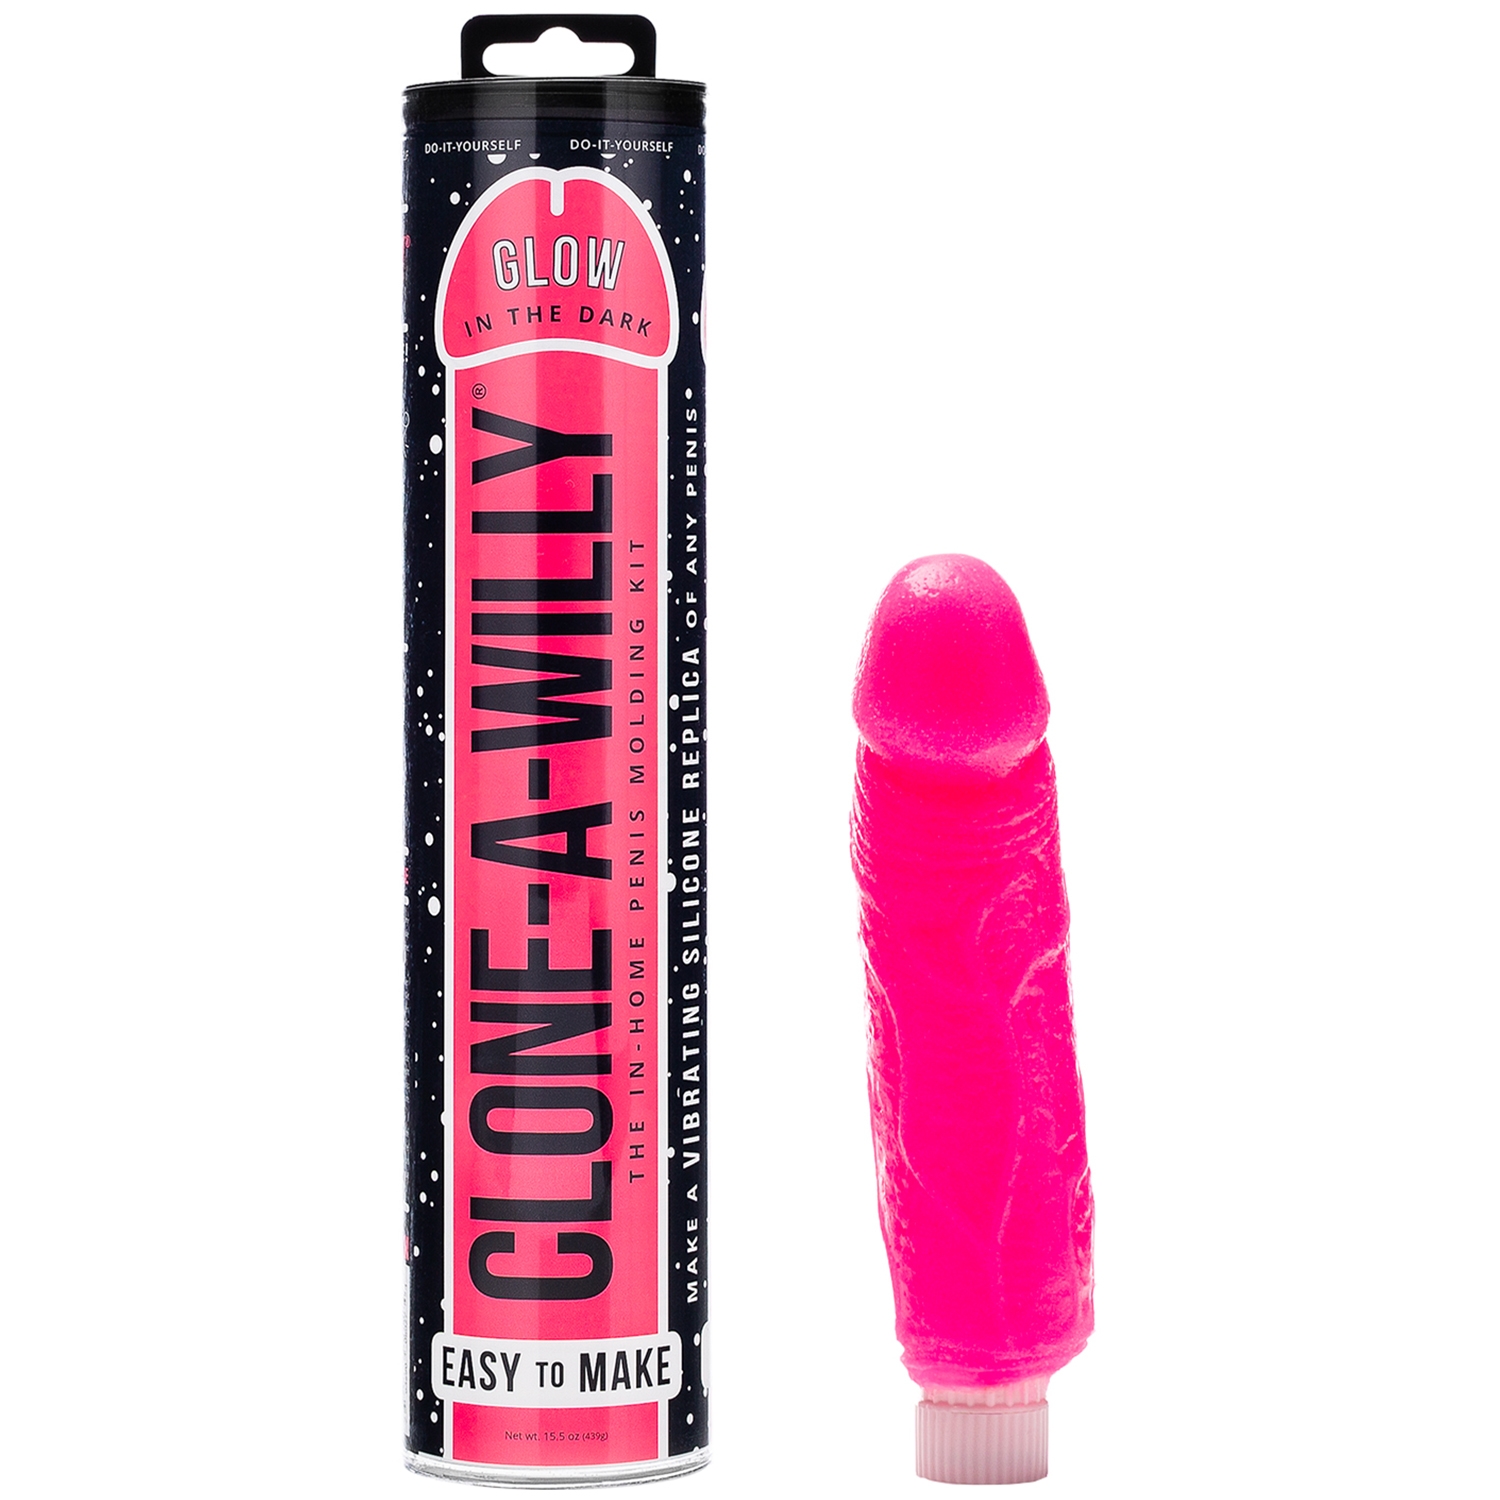 Clone-A-Willy DIY Homemade Dildo Clone Kit Glow In The Dark Pink - Pink